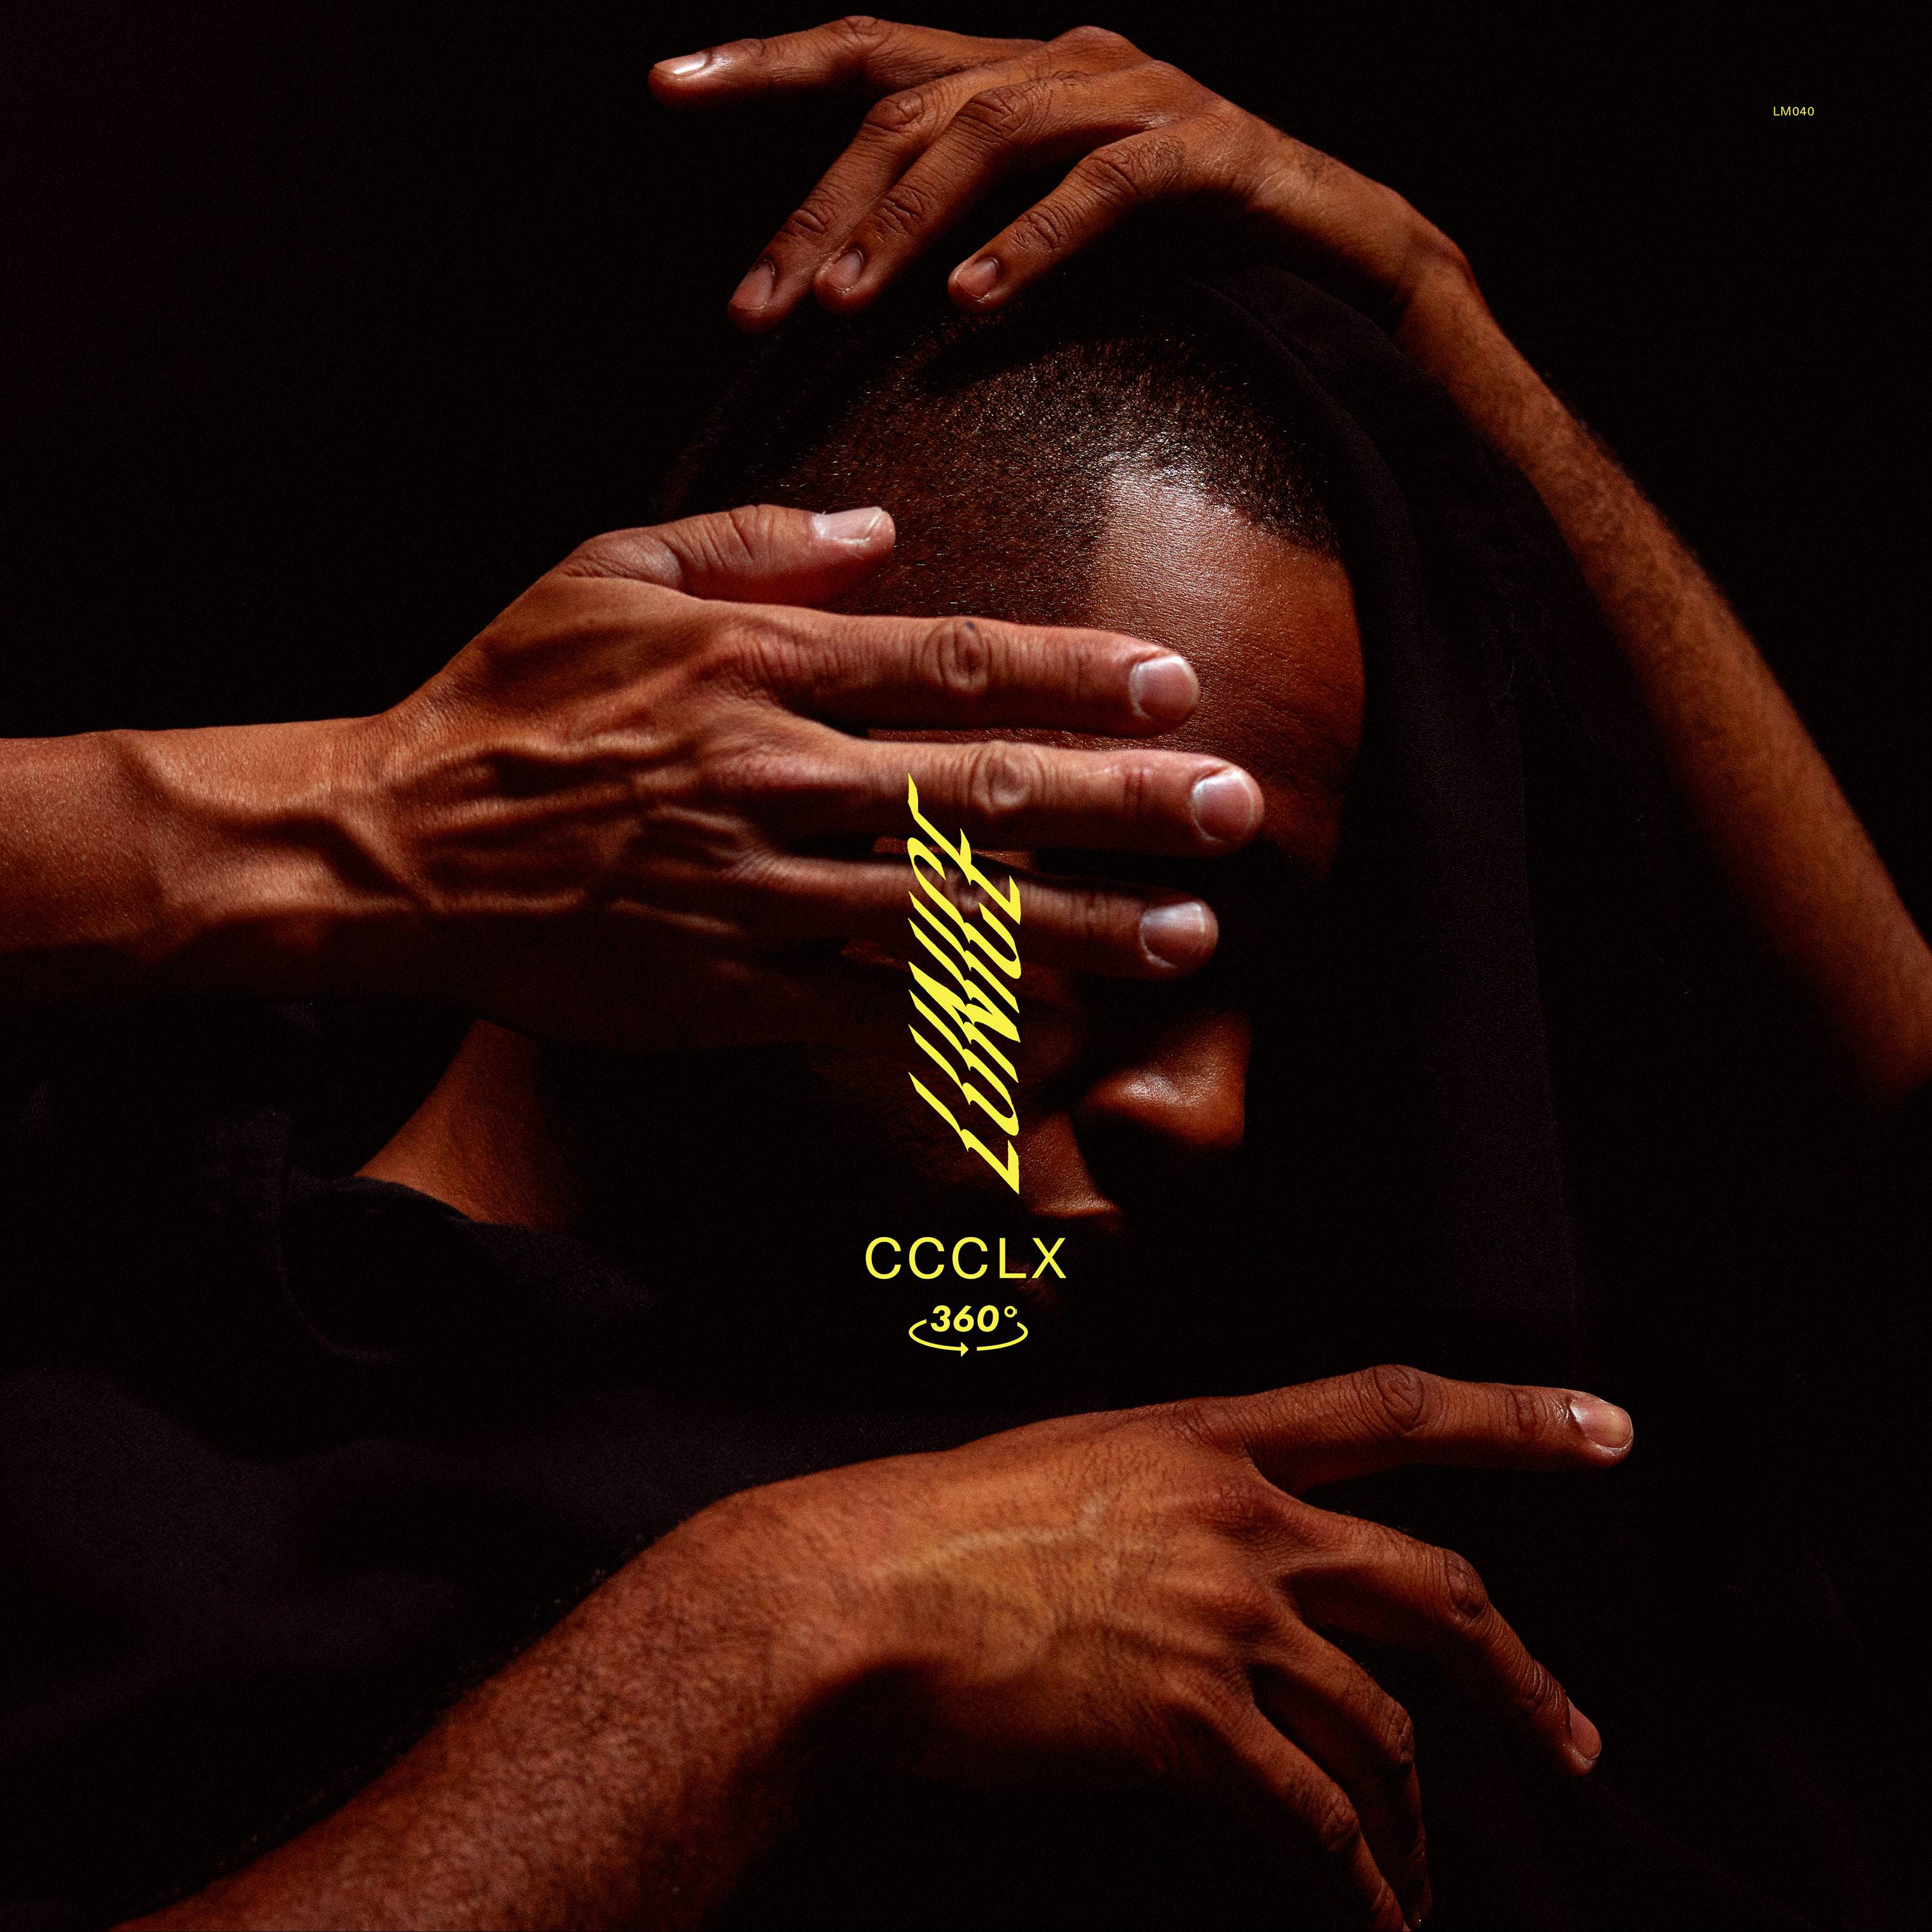 Lunice announces debut album CCCLX , shares new single "Distrust" featuring Denzel Curry, JK the Reaper, and Nell